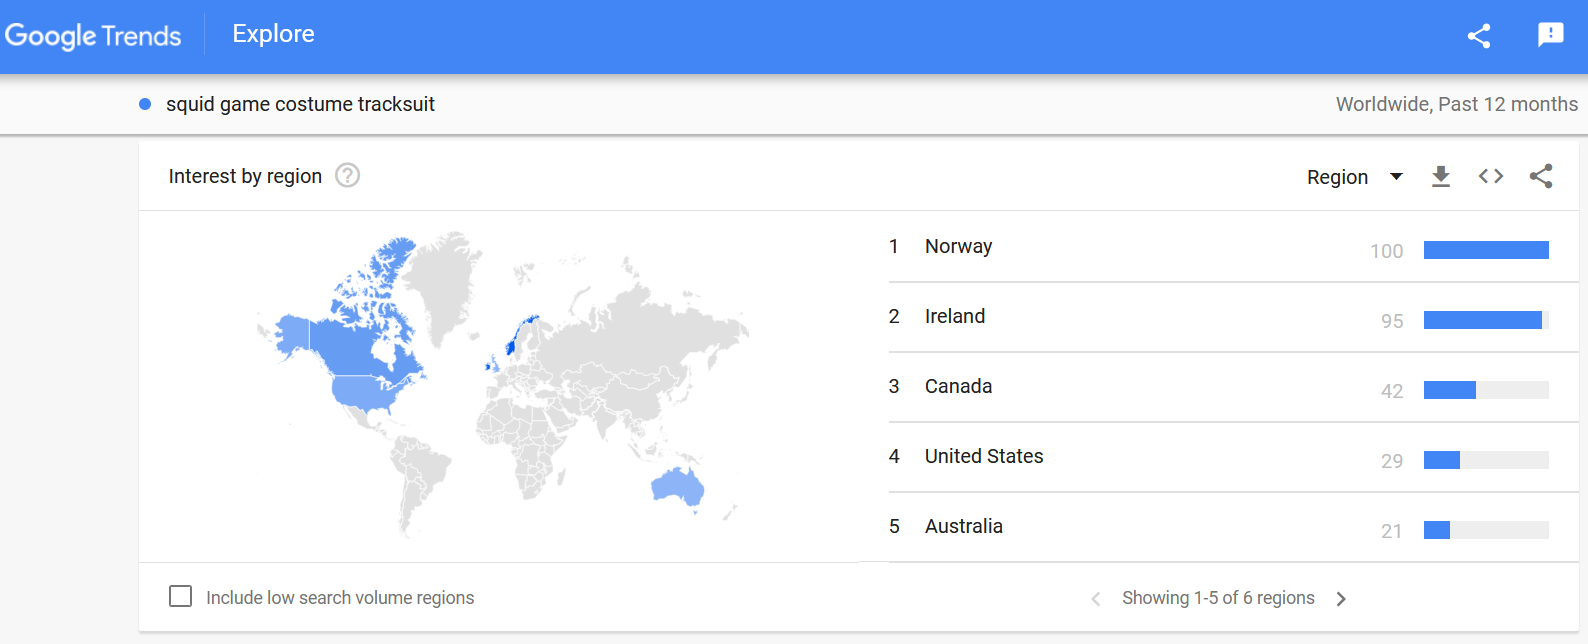 Worldwide - squid game costume tracksuit - google trends